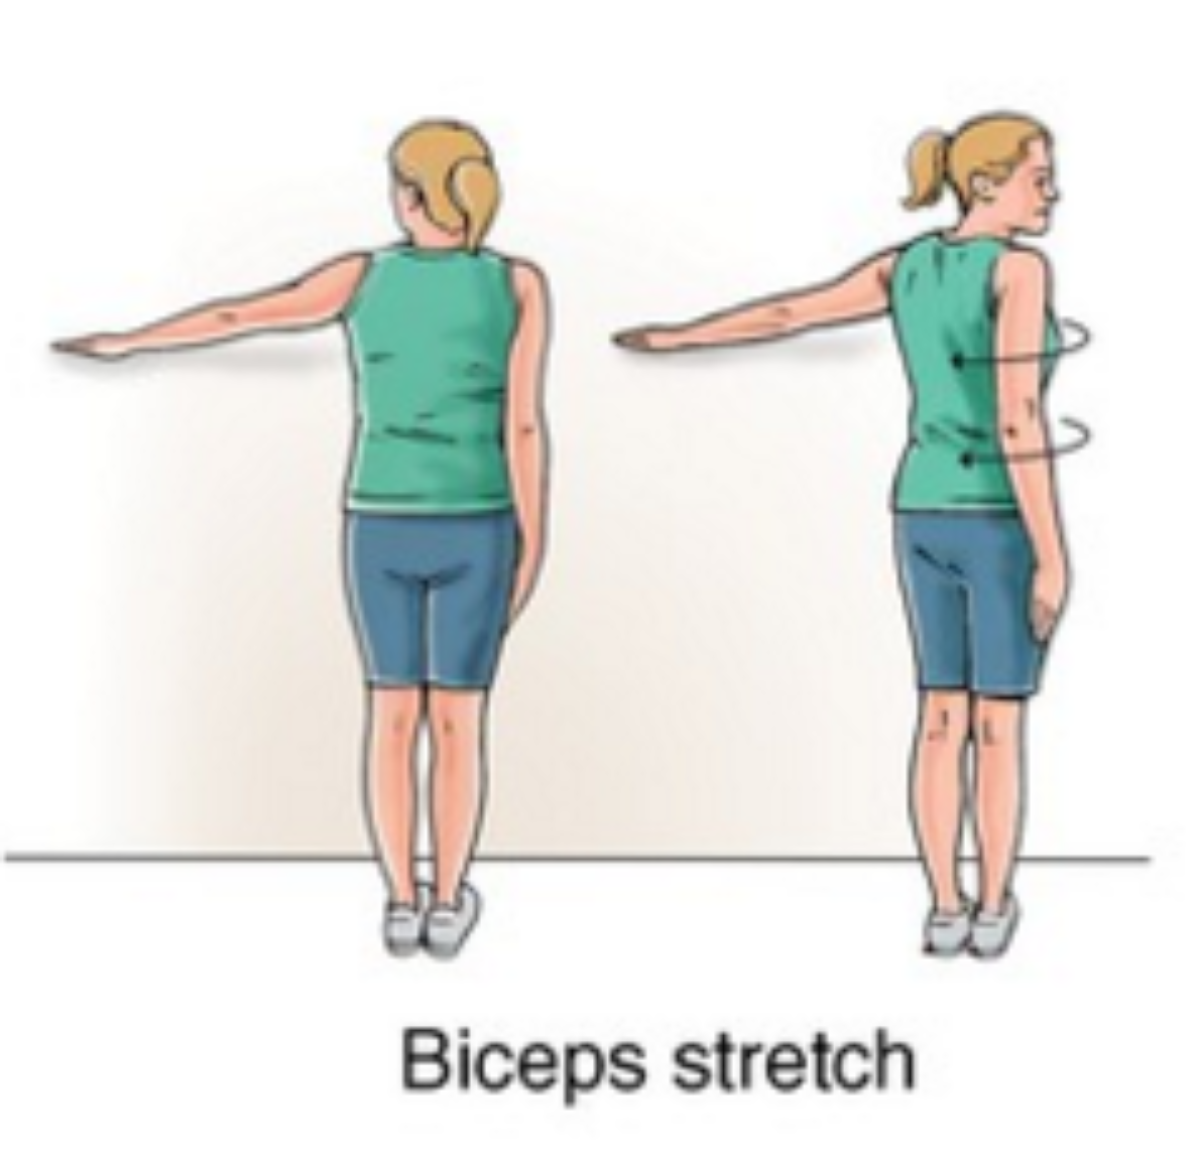 Biceps muscle stretching - Health Benefits, How to do?